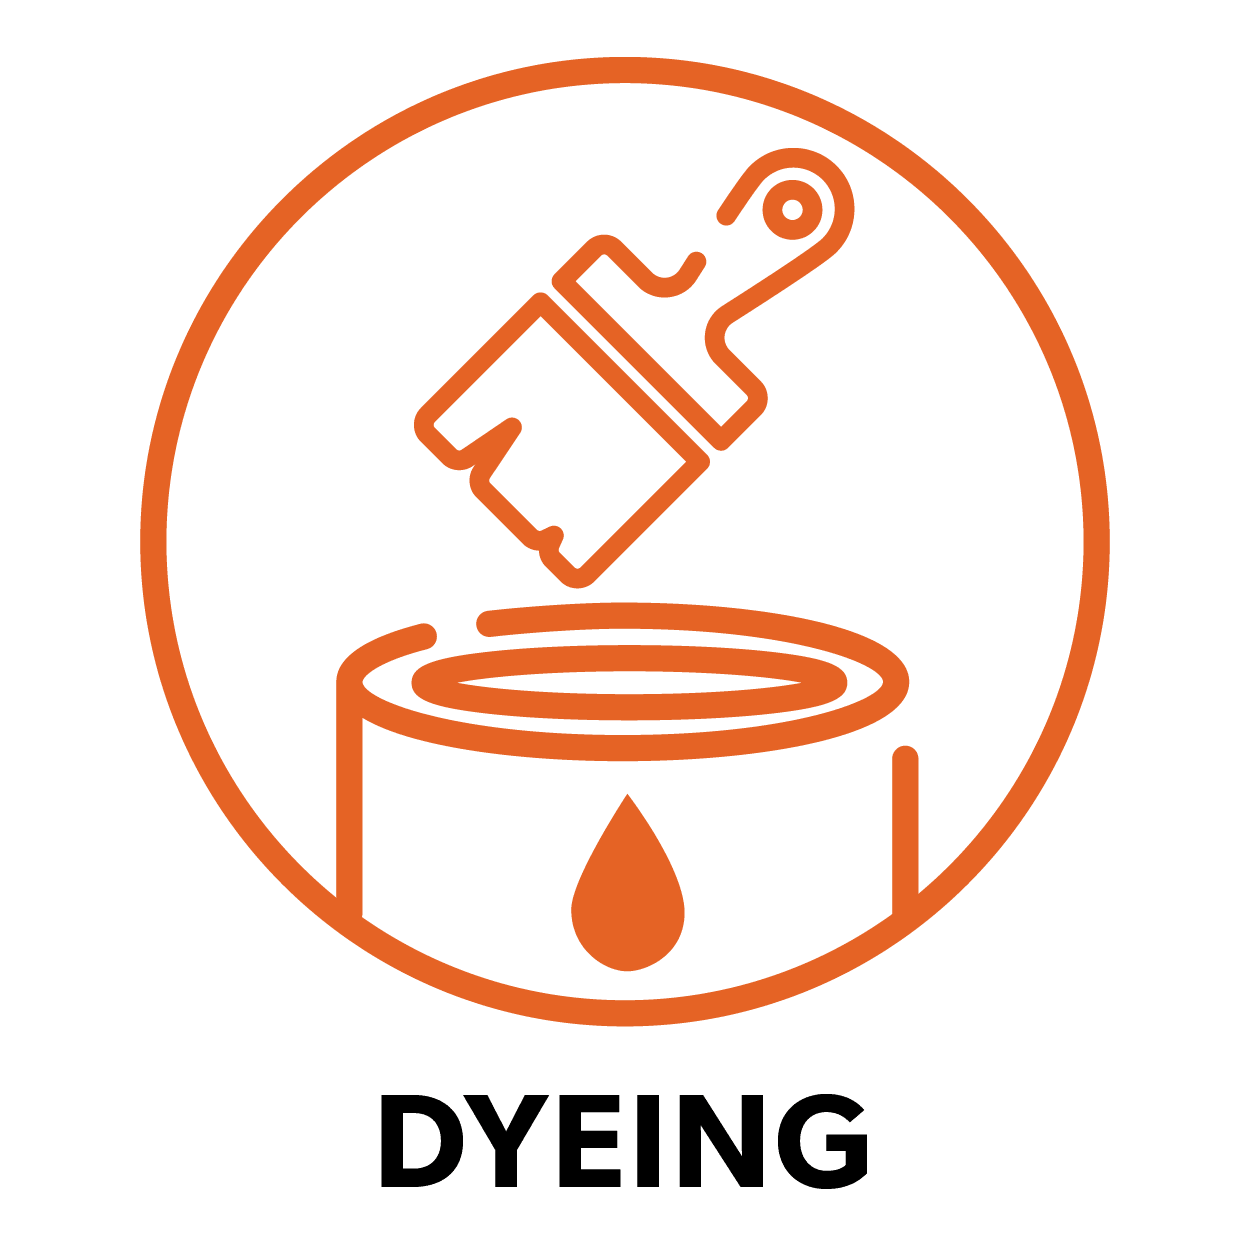 Dyeing - Value Added Service